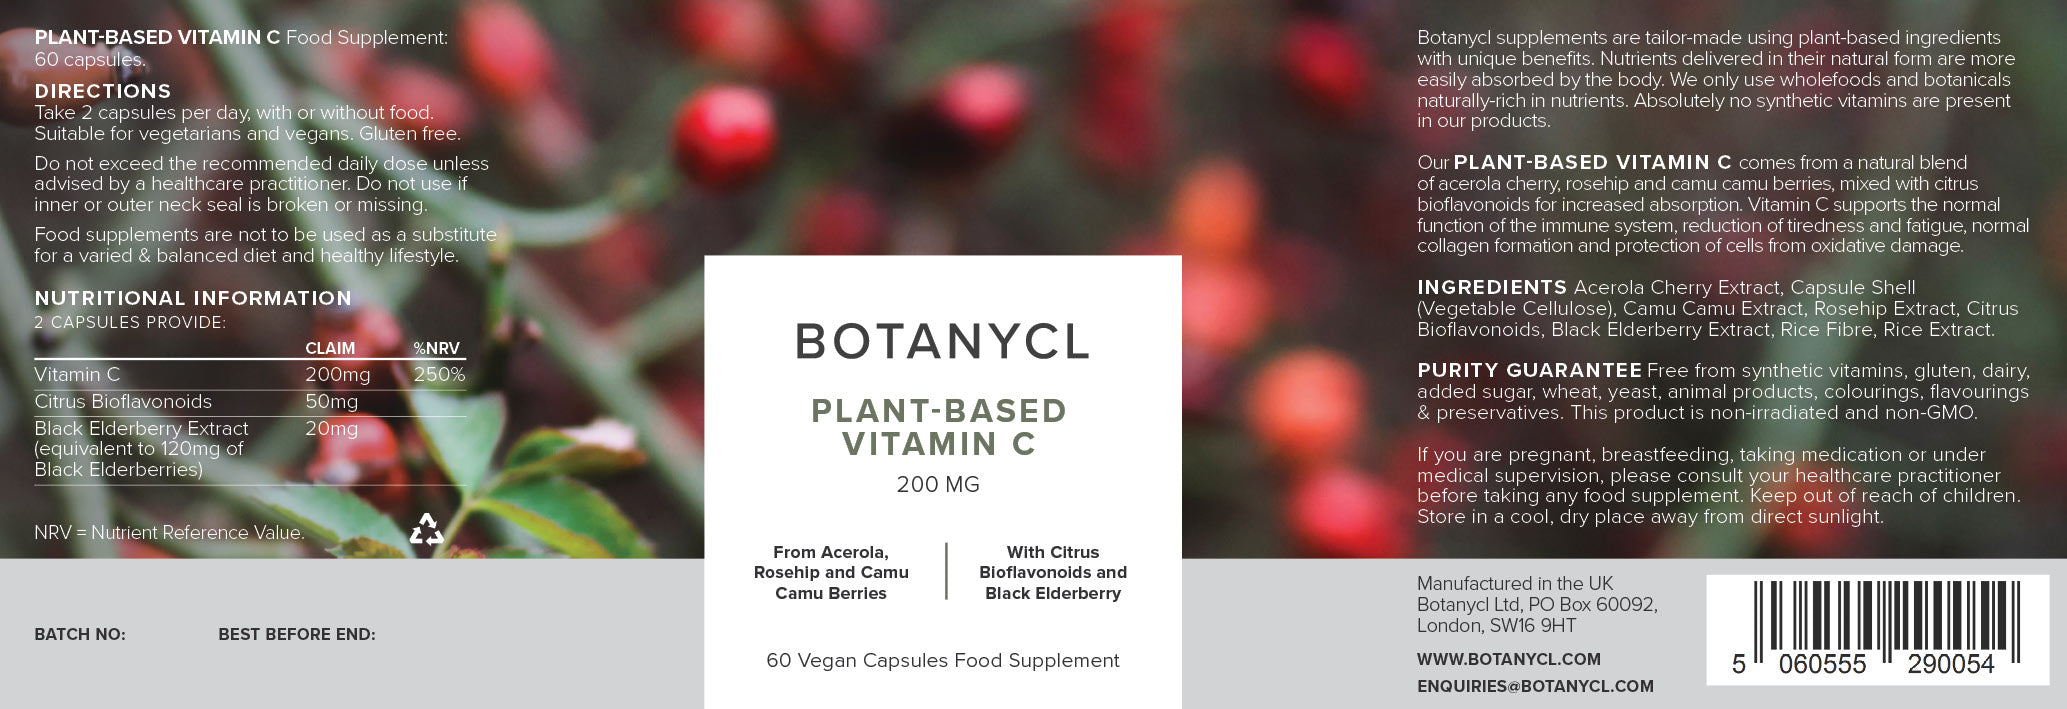 Plant-based Natural Vitamin C 200mg by Botanycl. Acerola cherry, rosehips and black elderberry provide immunity support.